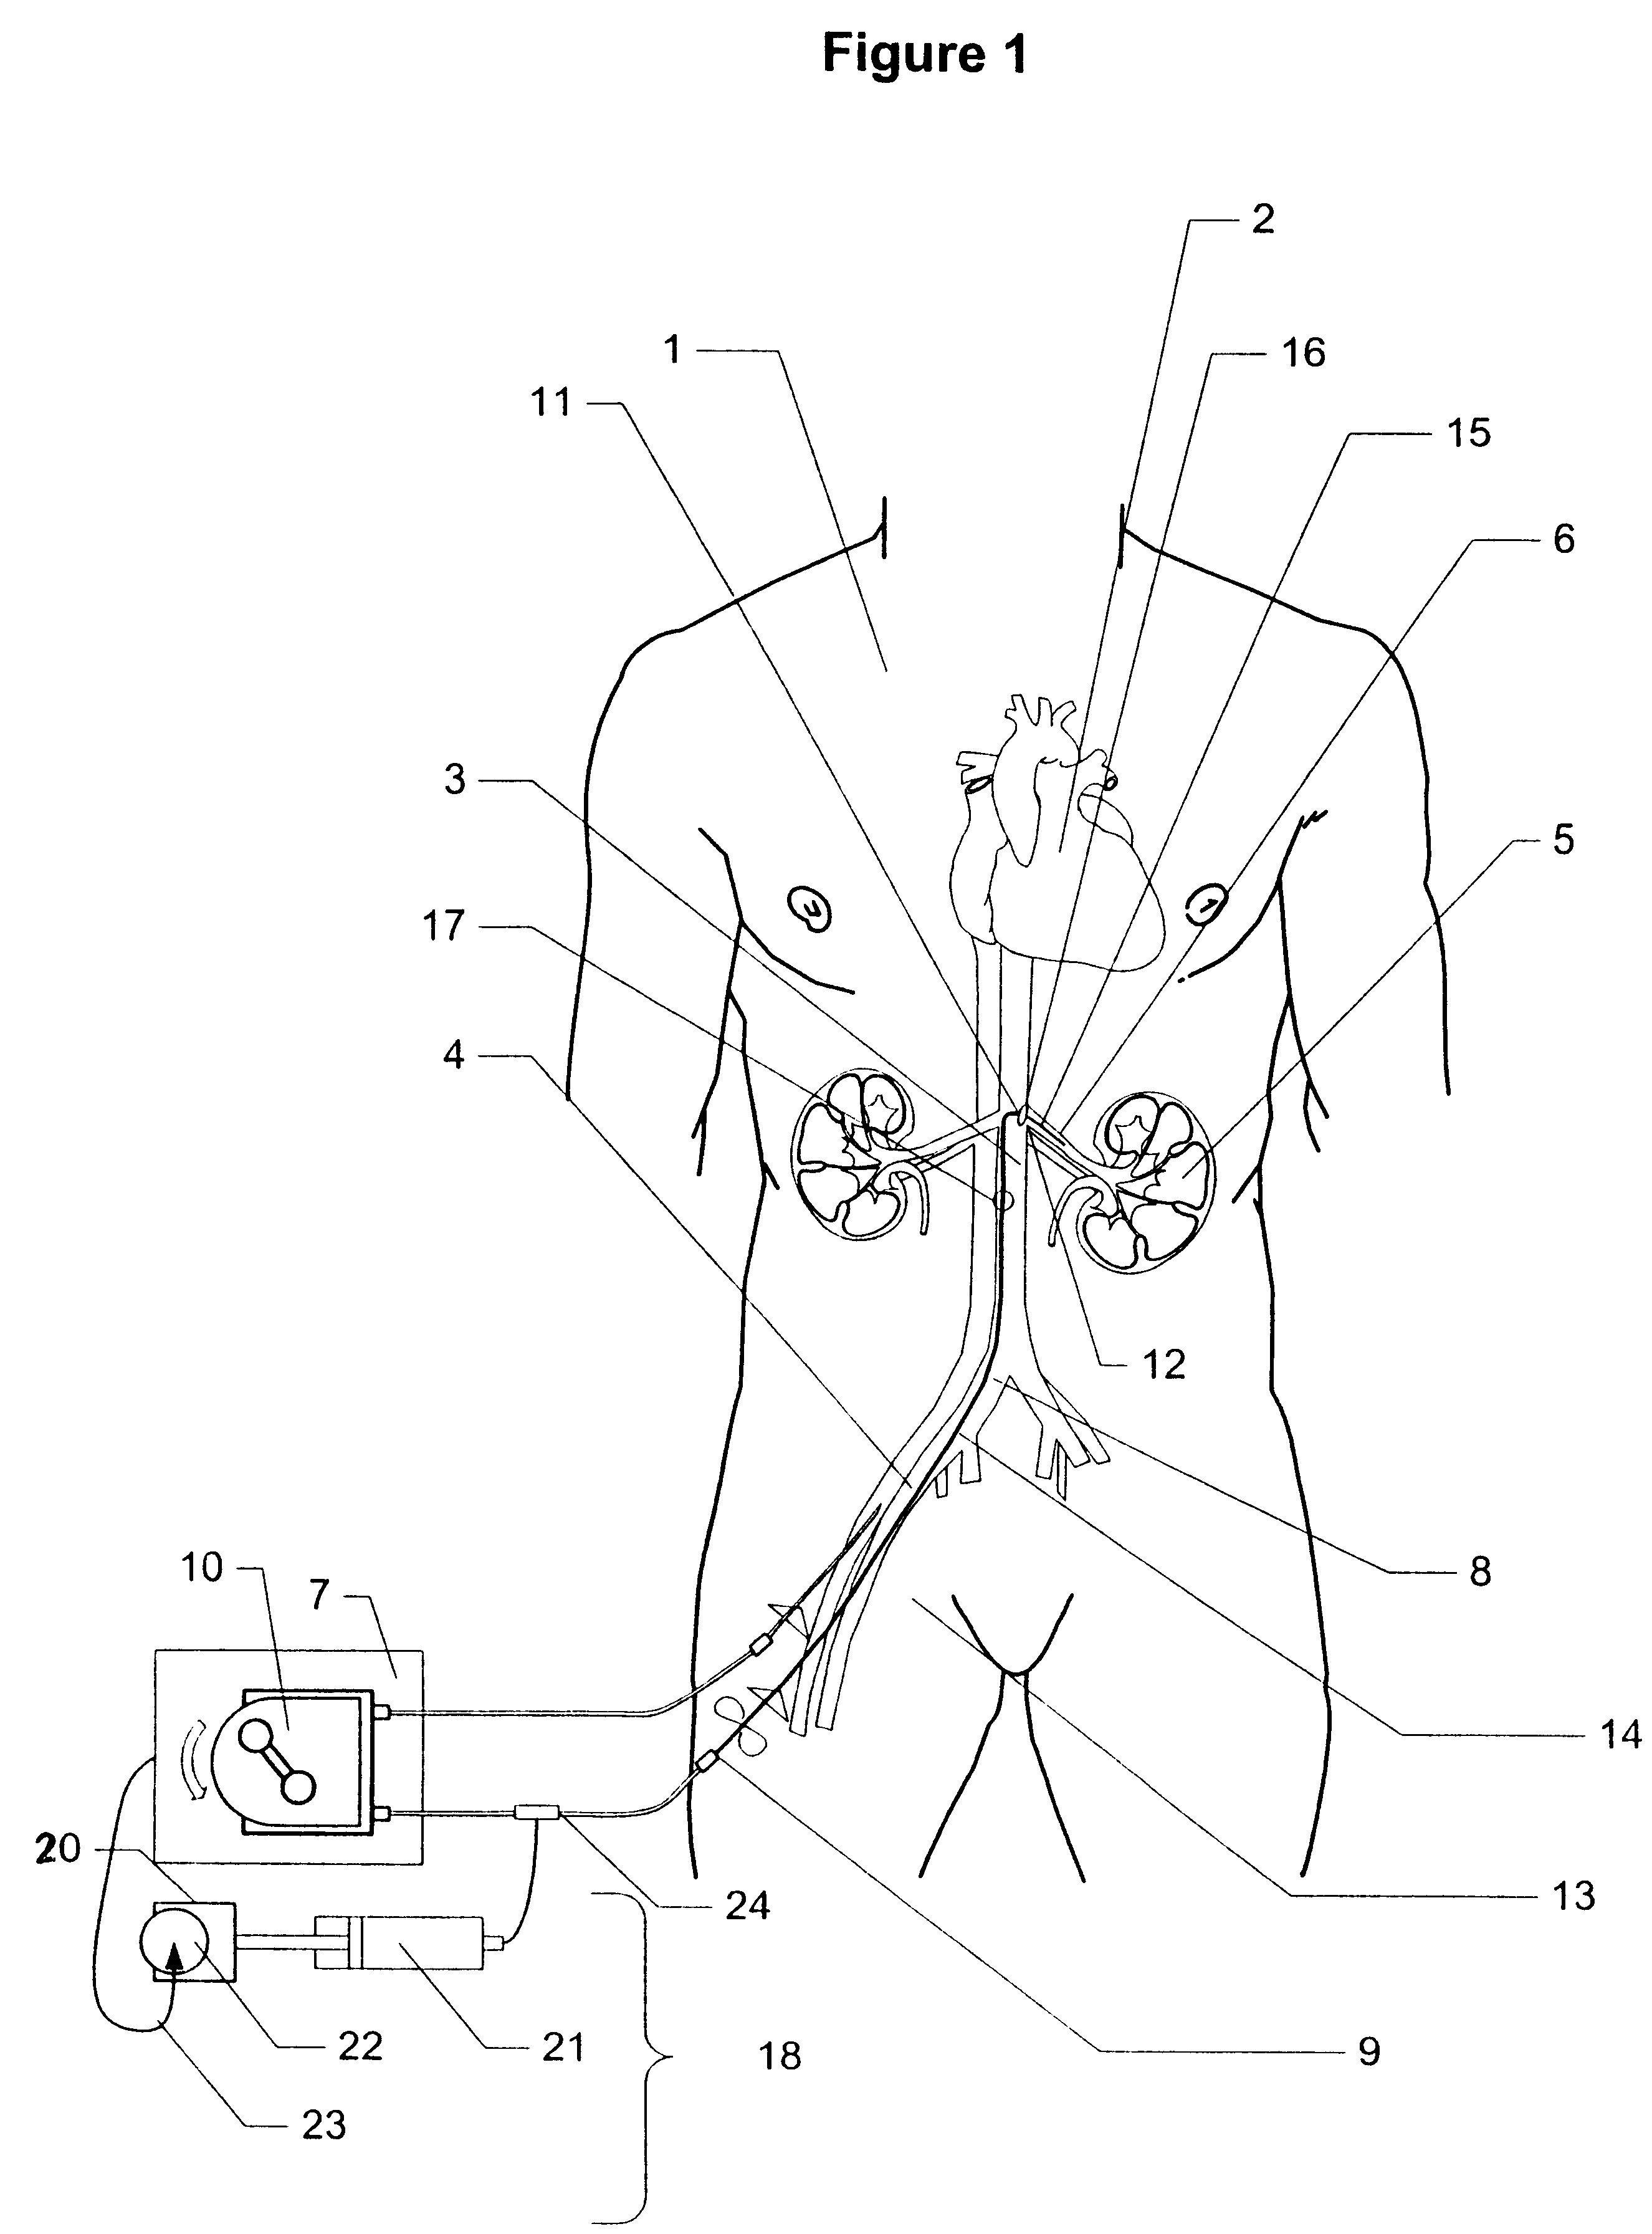 Method and apparatus for treatment of congestive heart failure by improving perfusion of the kidney by infusion of a vasodilator